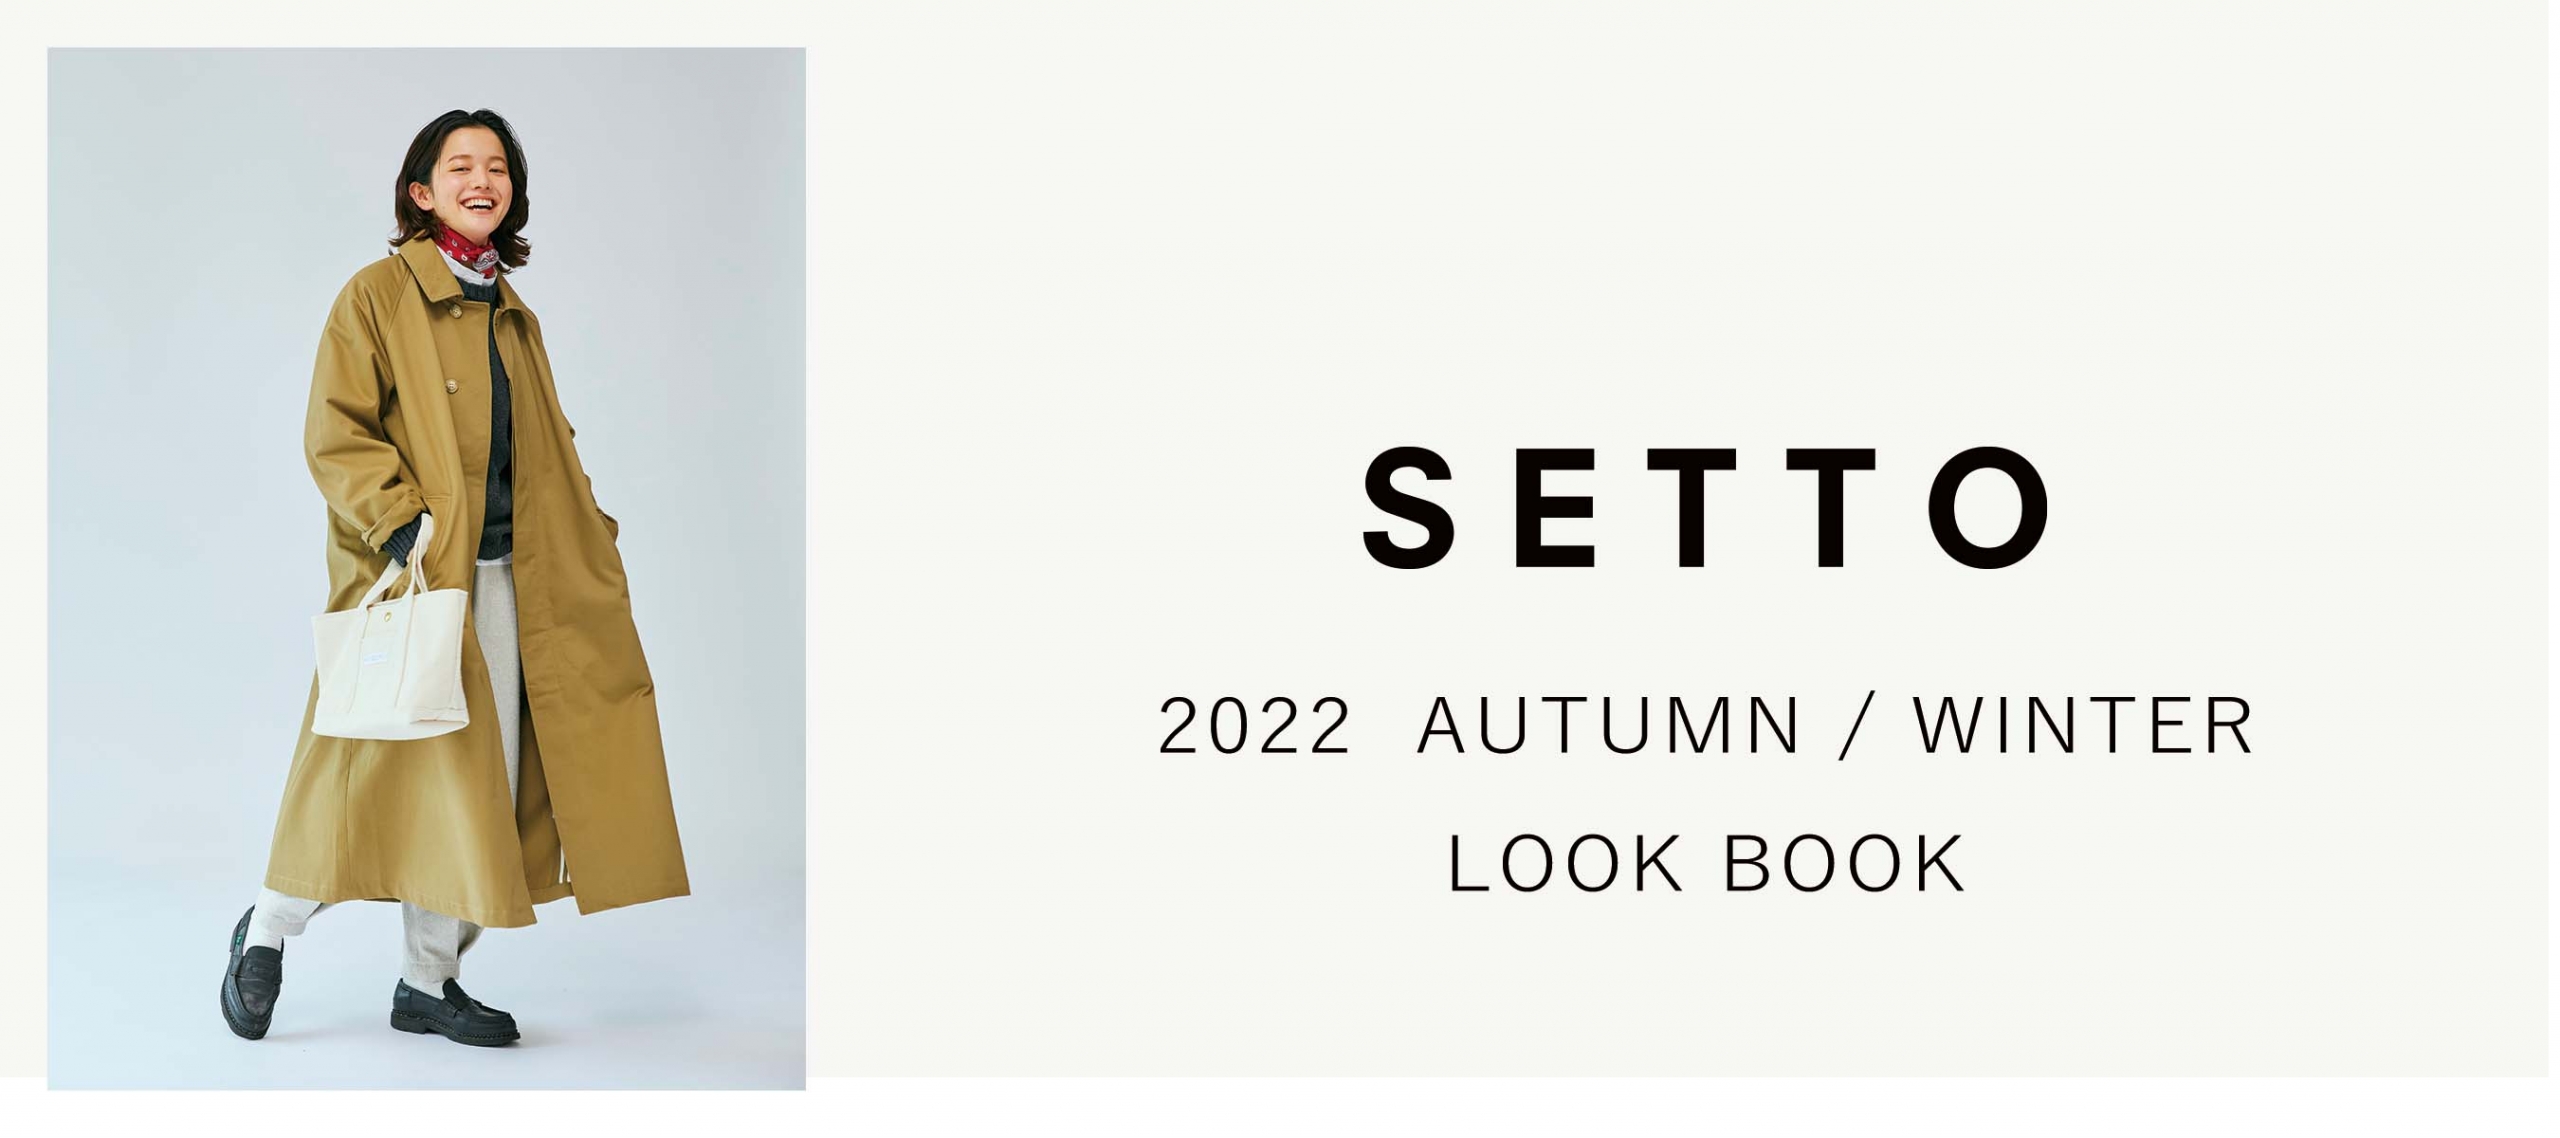 PC baner _SETTO 22AW lookbook-2